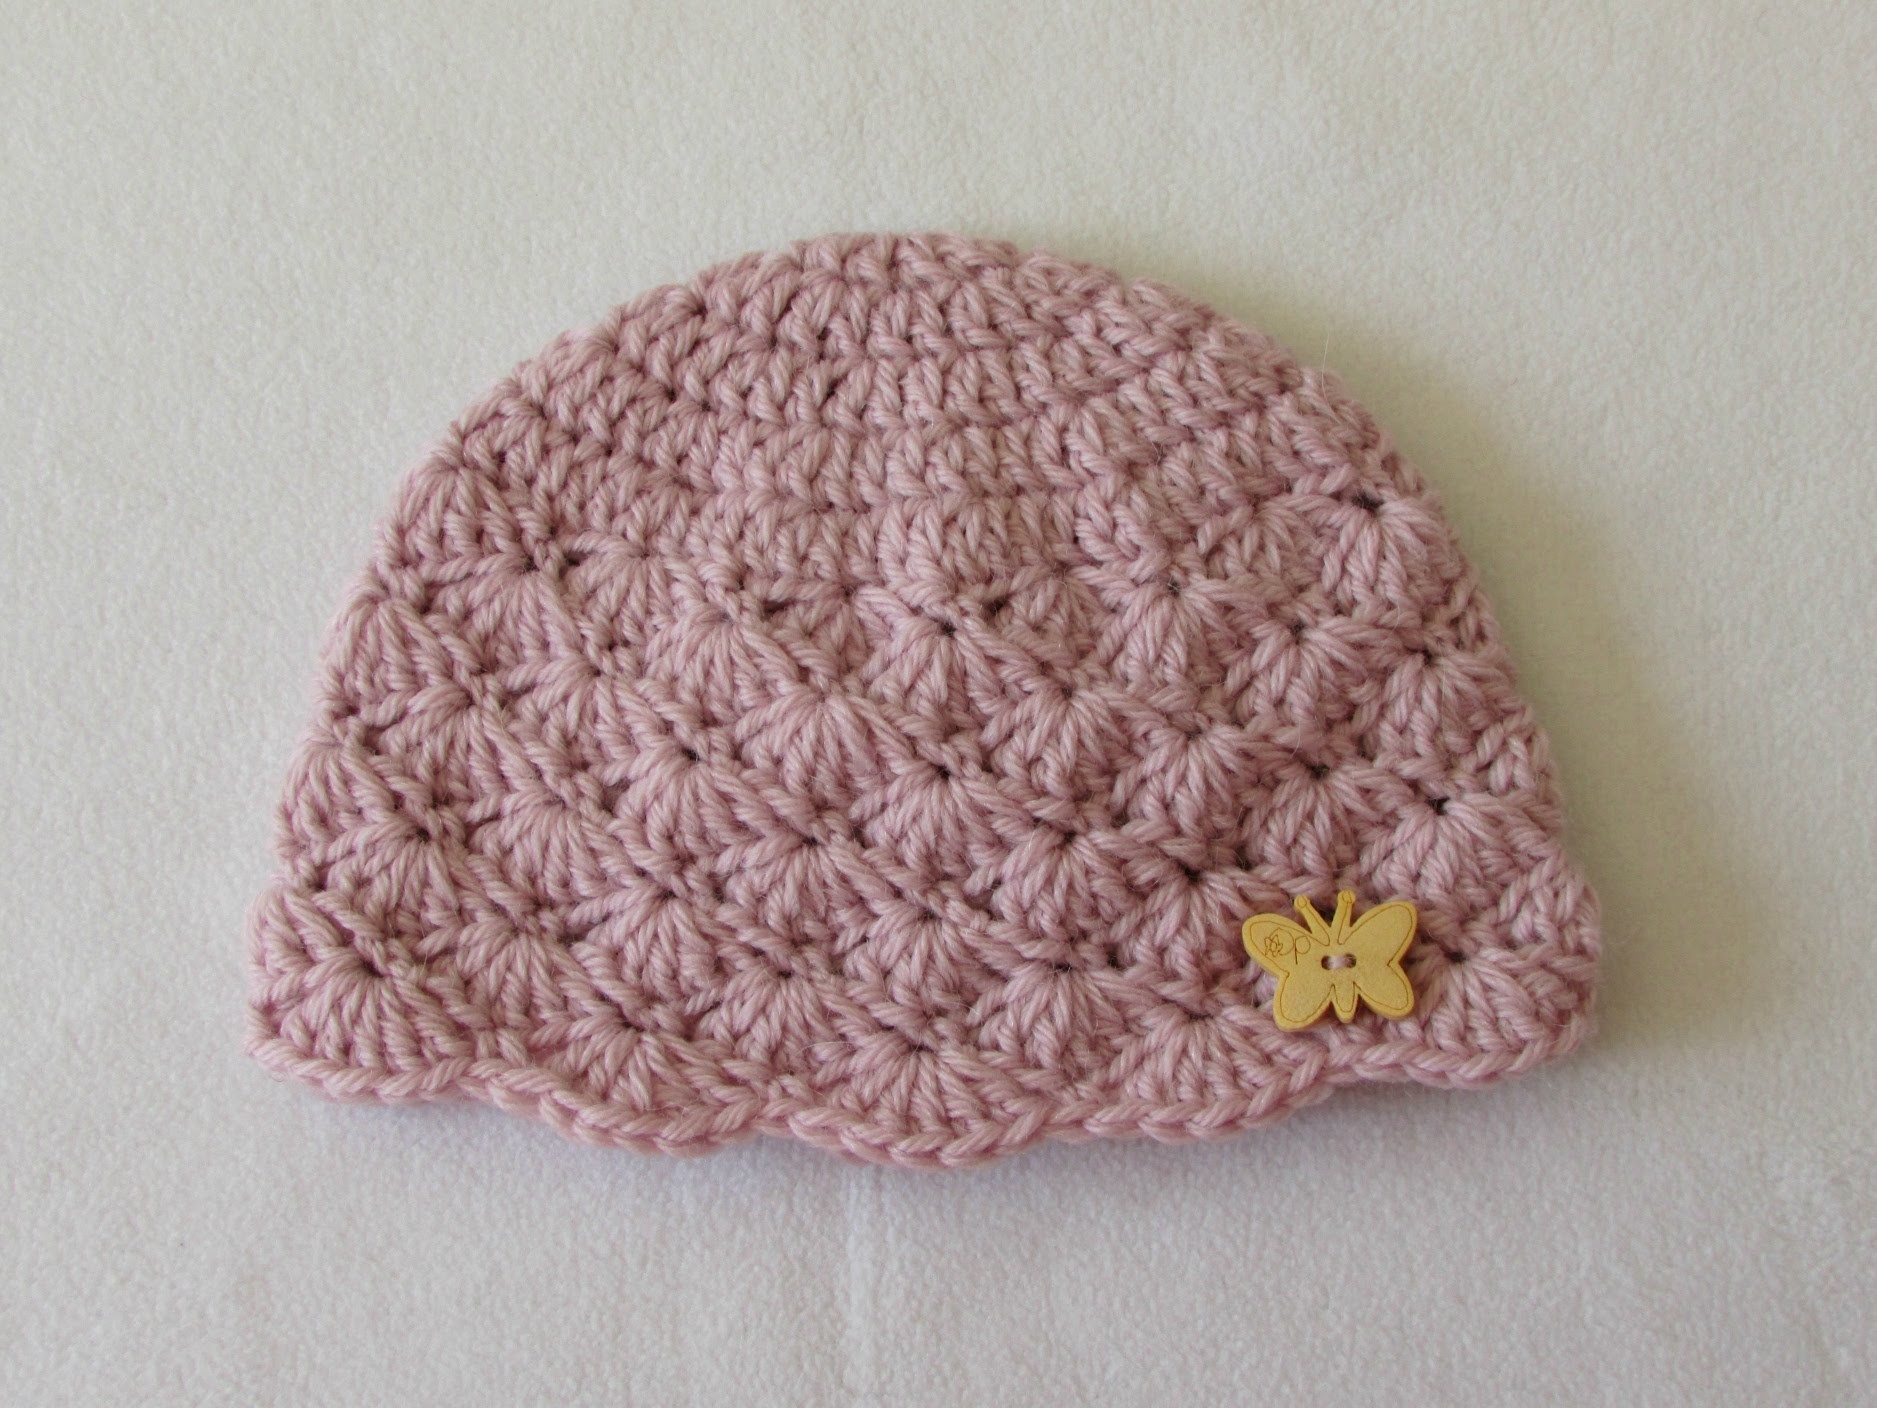 How to crochet a cute baby girl's hat for beginners